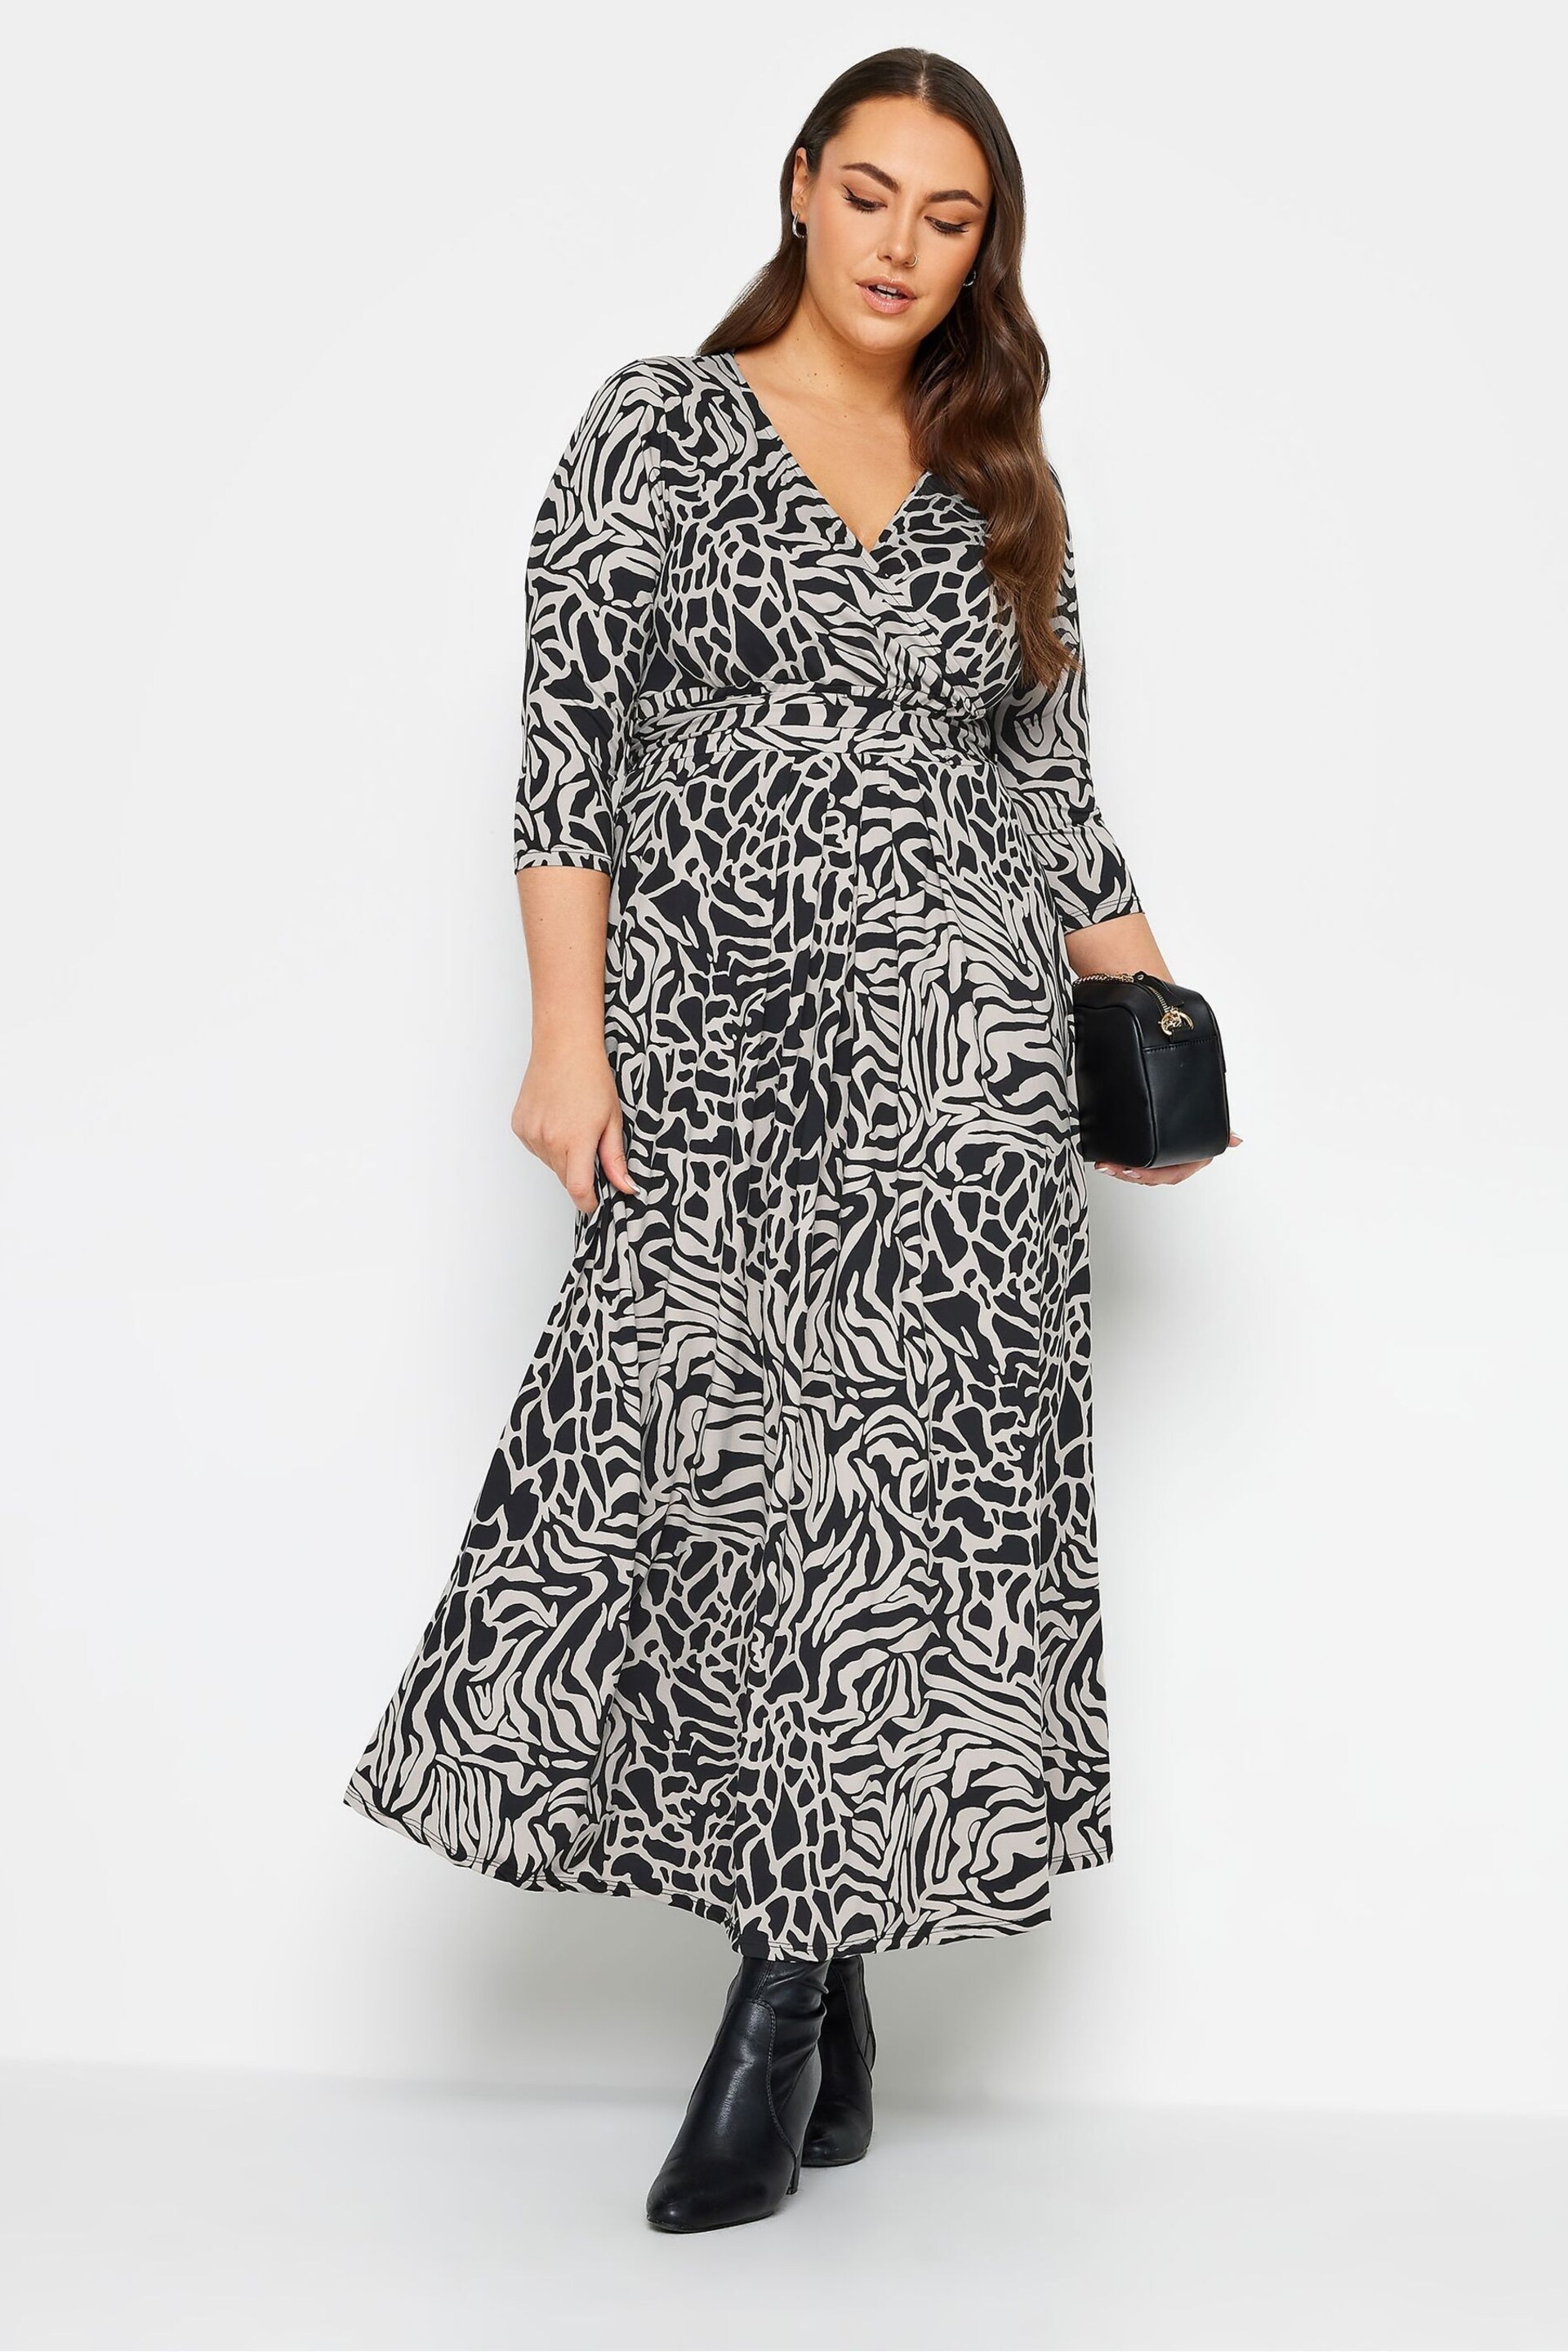 Yours Curve Black/White Maxi Wrap Dress - Image 2 of 4